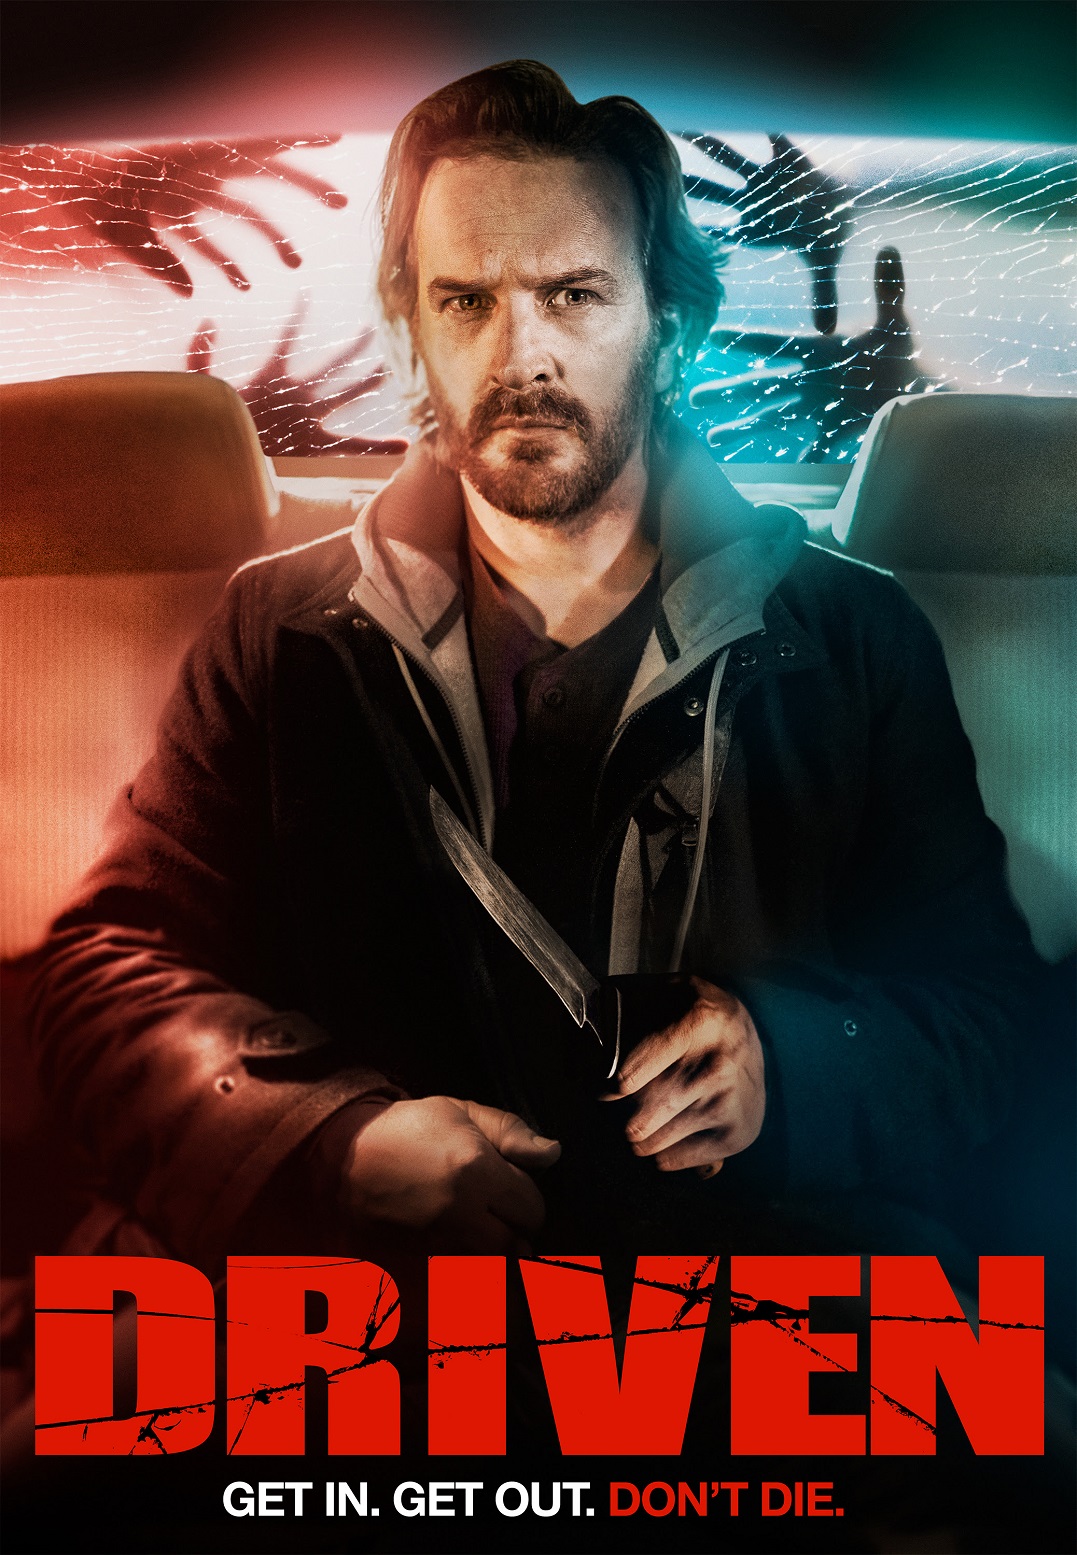 News] Prepare to be DRIVEN on DVD and Digital this June!